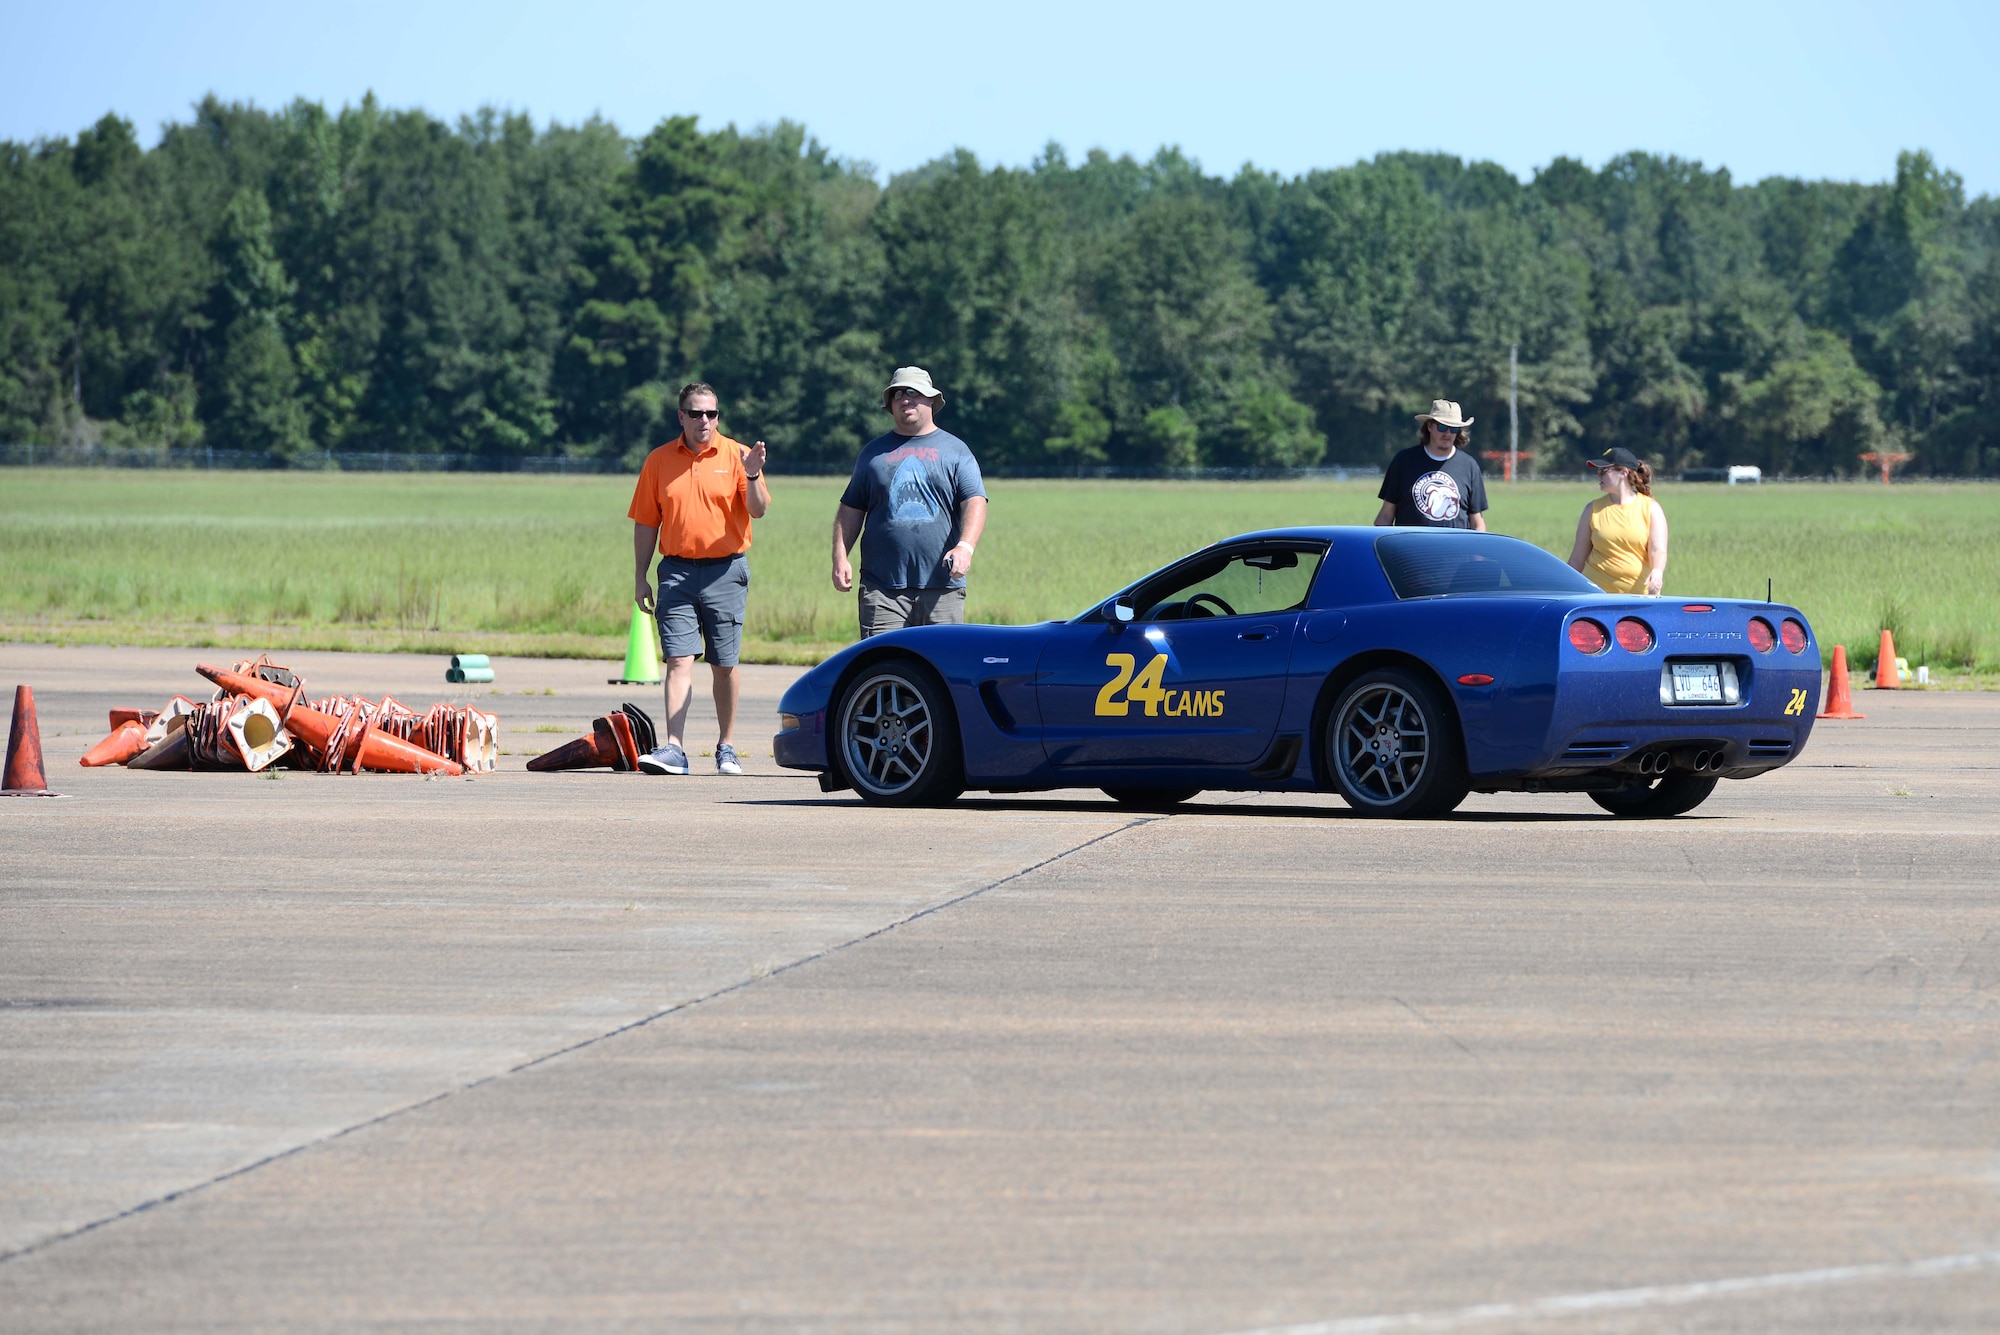 Volunteers and spectators walk up to one of the autocross cars Aug. 17, 2019, on Columbus Air Force Base, Miss. Sixteen autocross drivers from surrounding communities and states competed for the fastest times on the flight line. (U.S. Air Force photo by Airman 1st Class Jake Jacobsen)